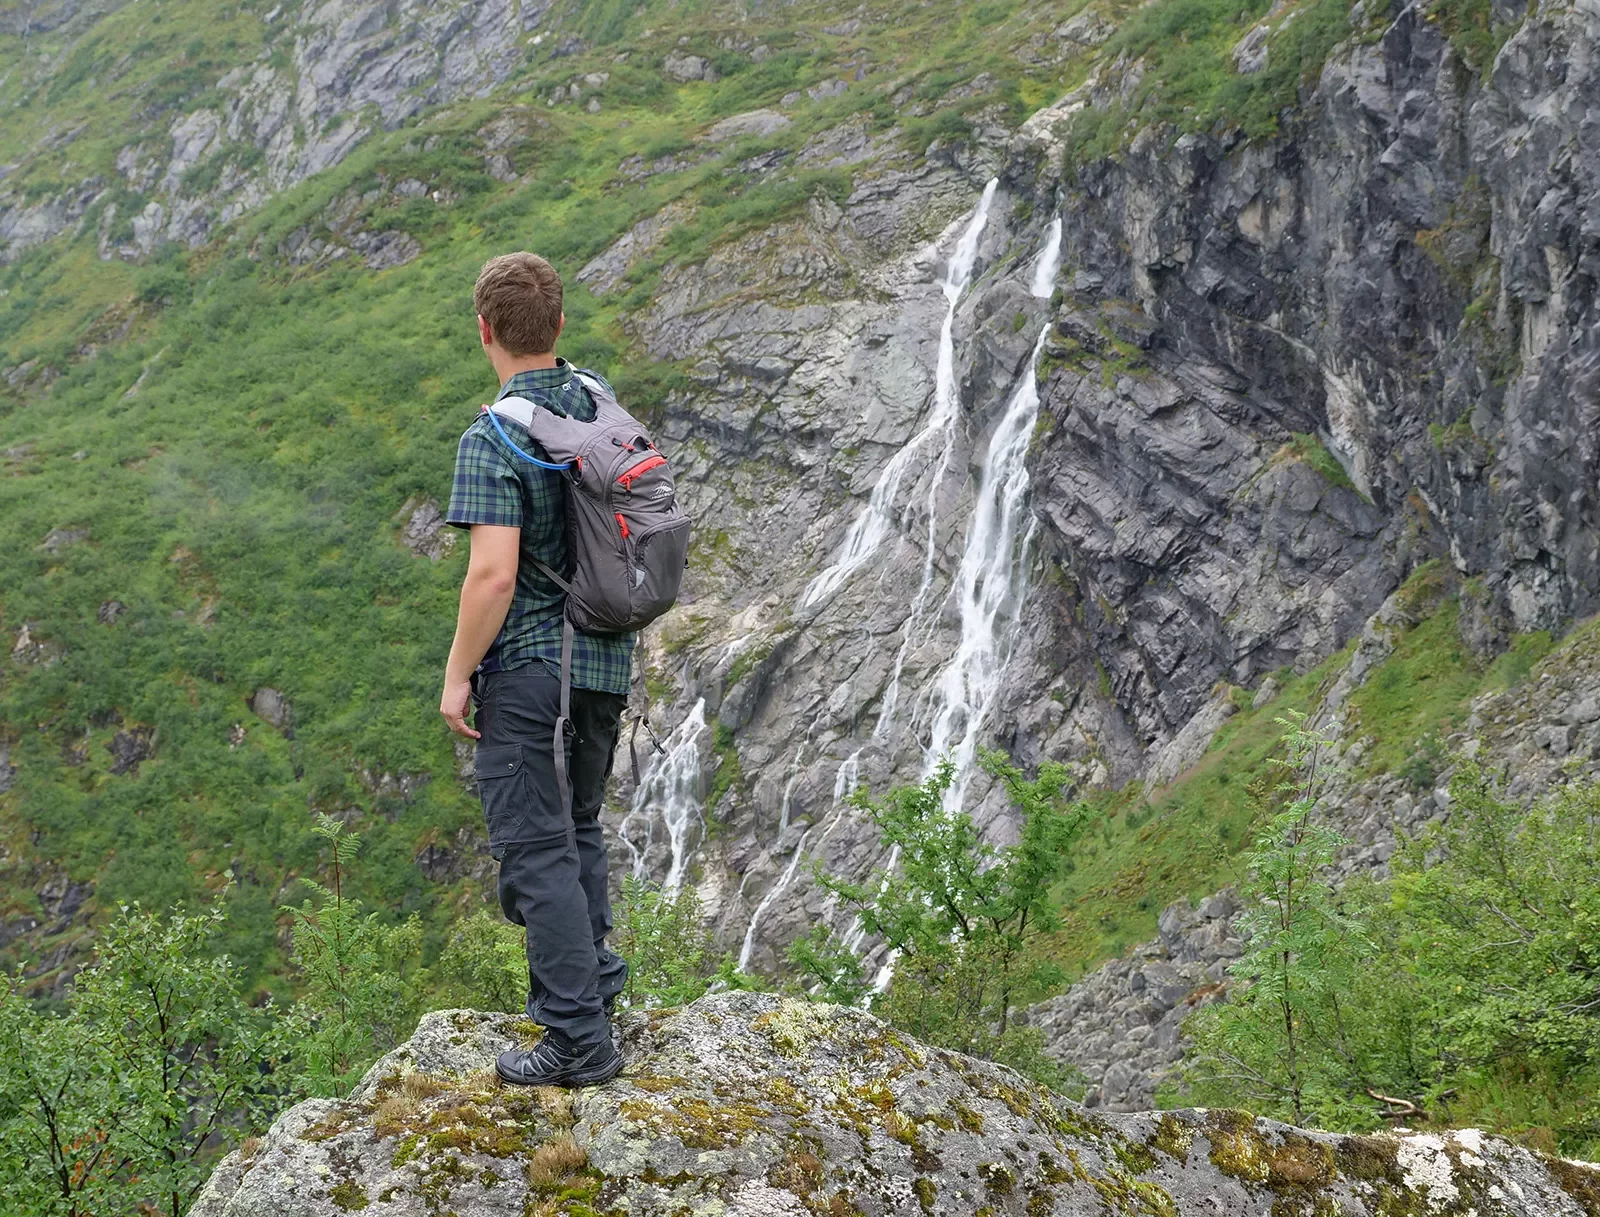 Solo hiker facing away from the camera, looking out at waterfall